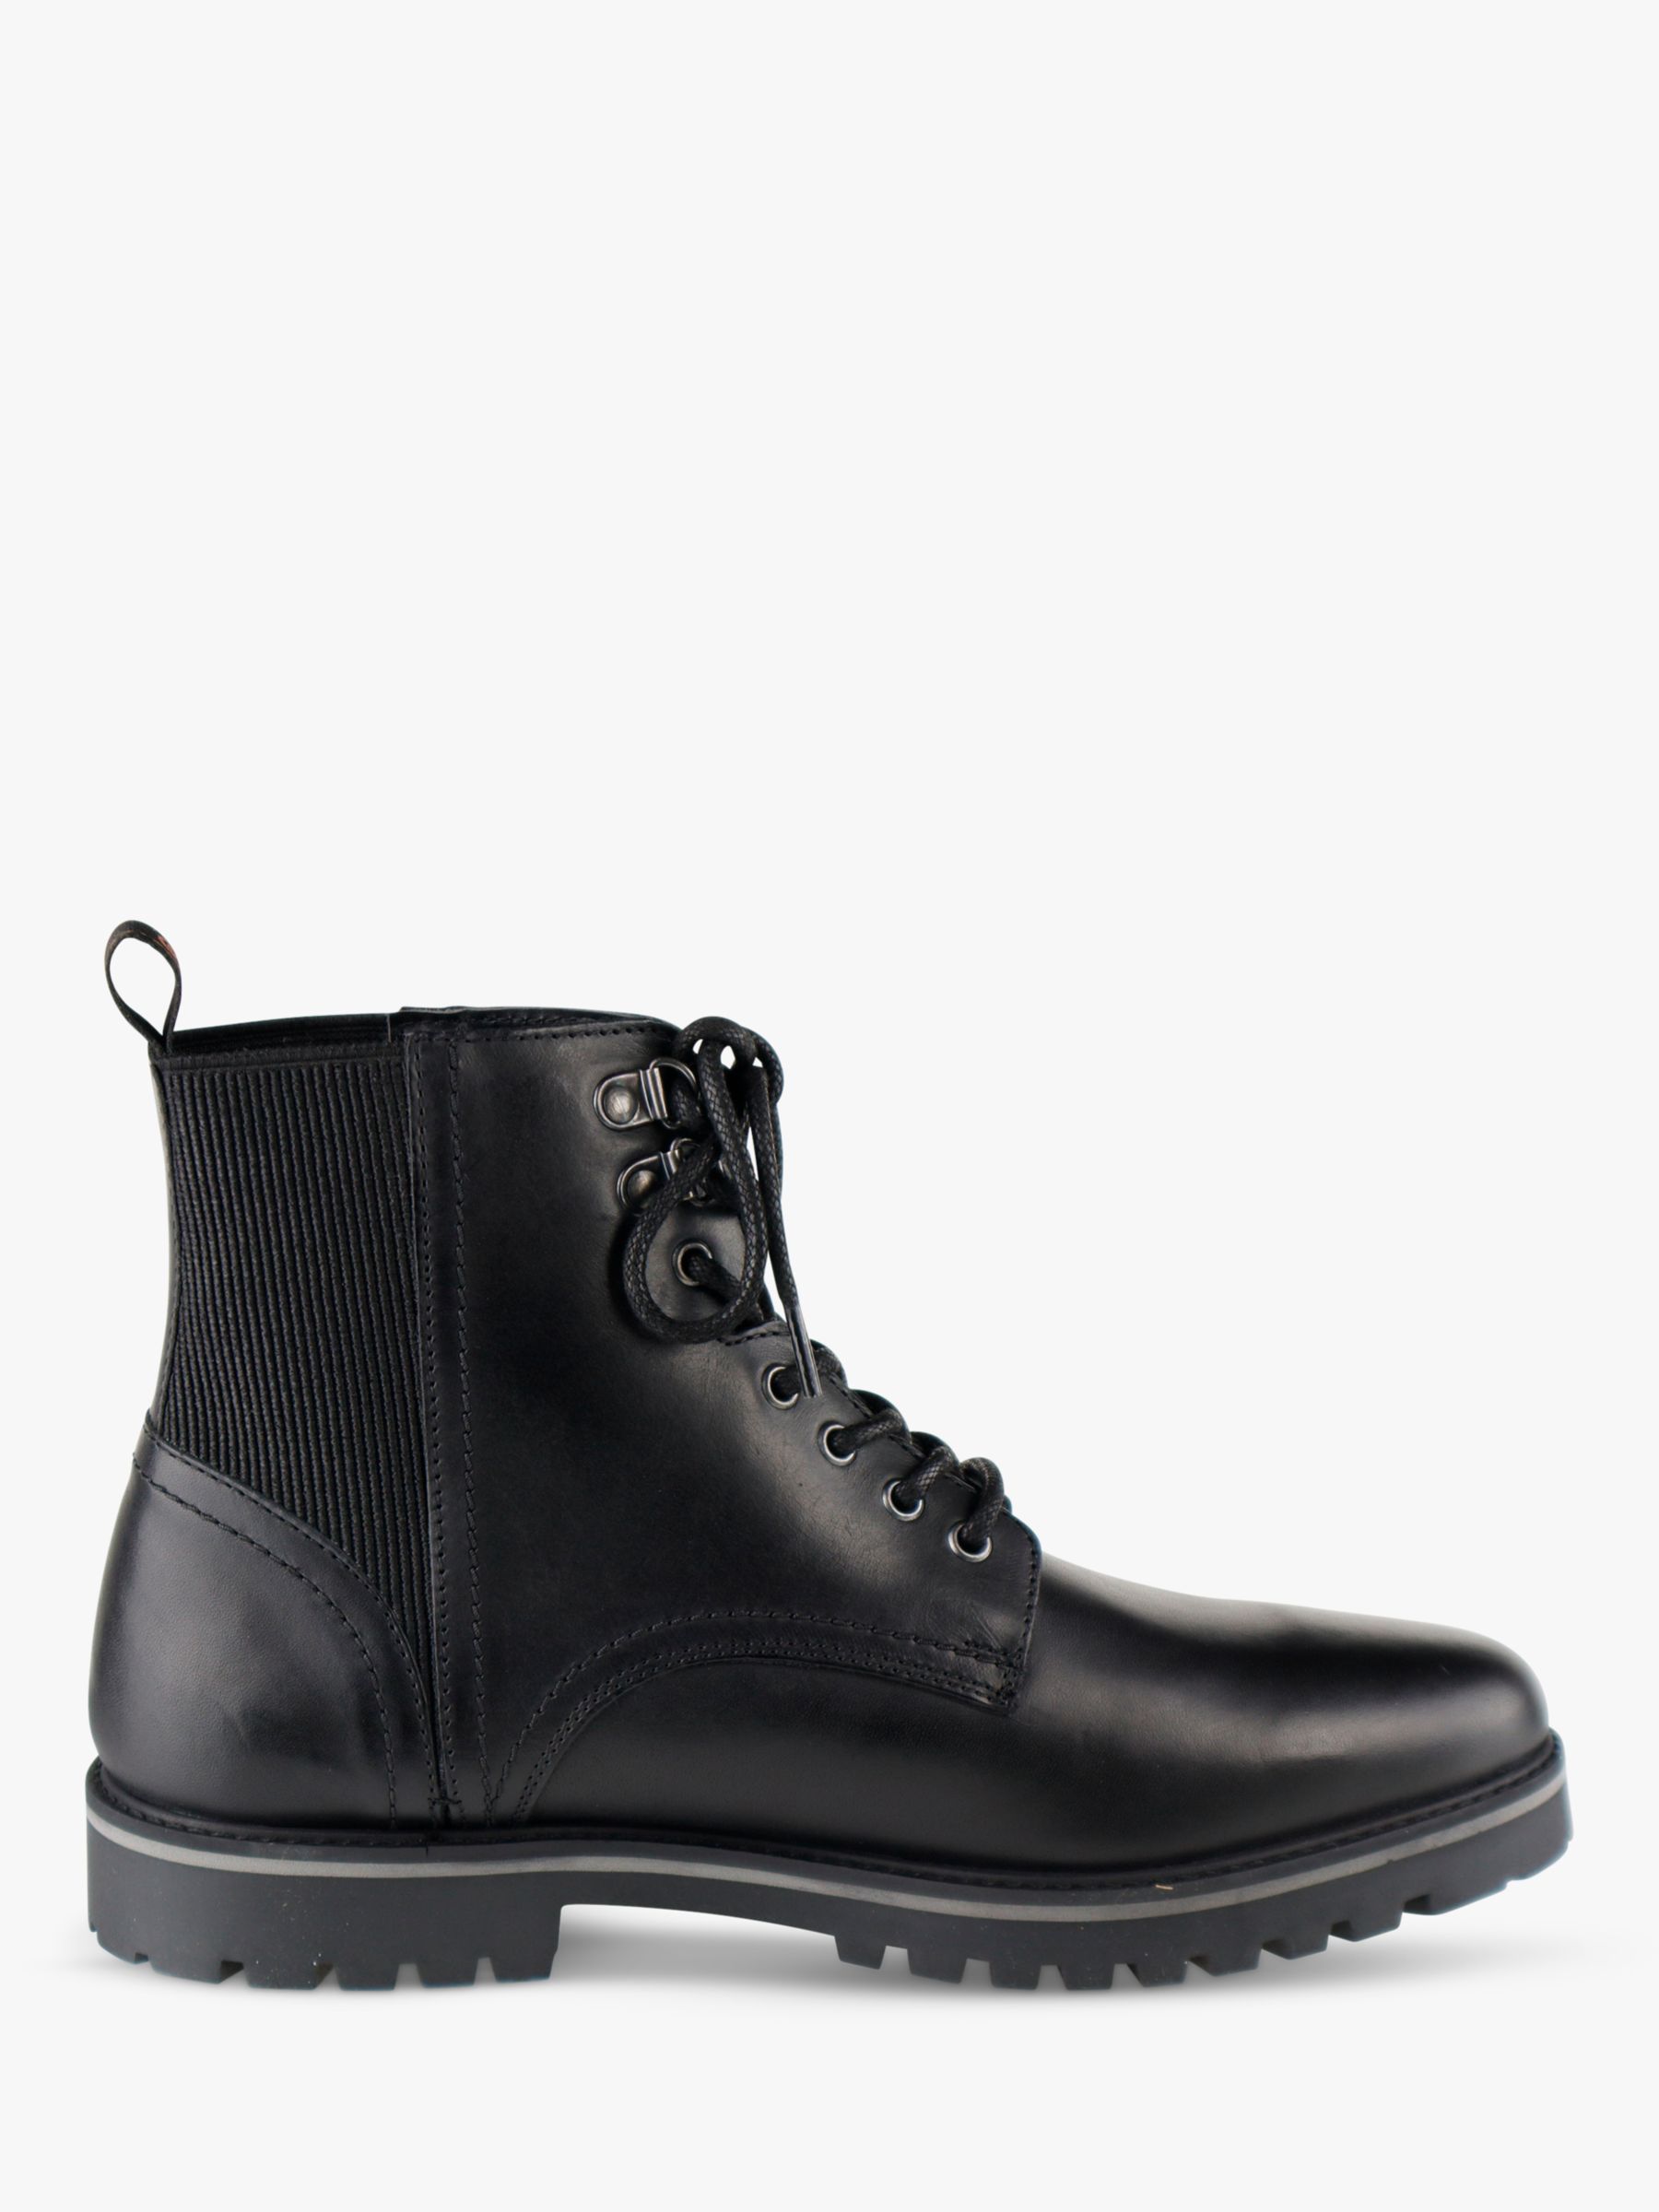 Silver Street London Manchester Leather Hiker Boots, Black at John ...